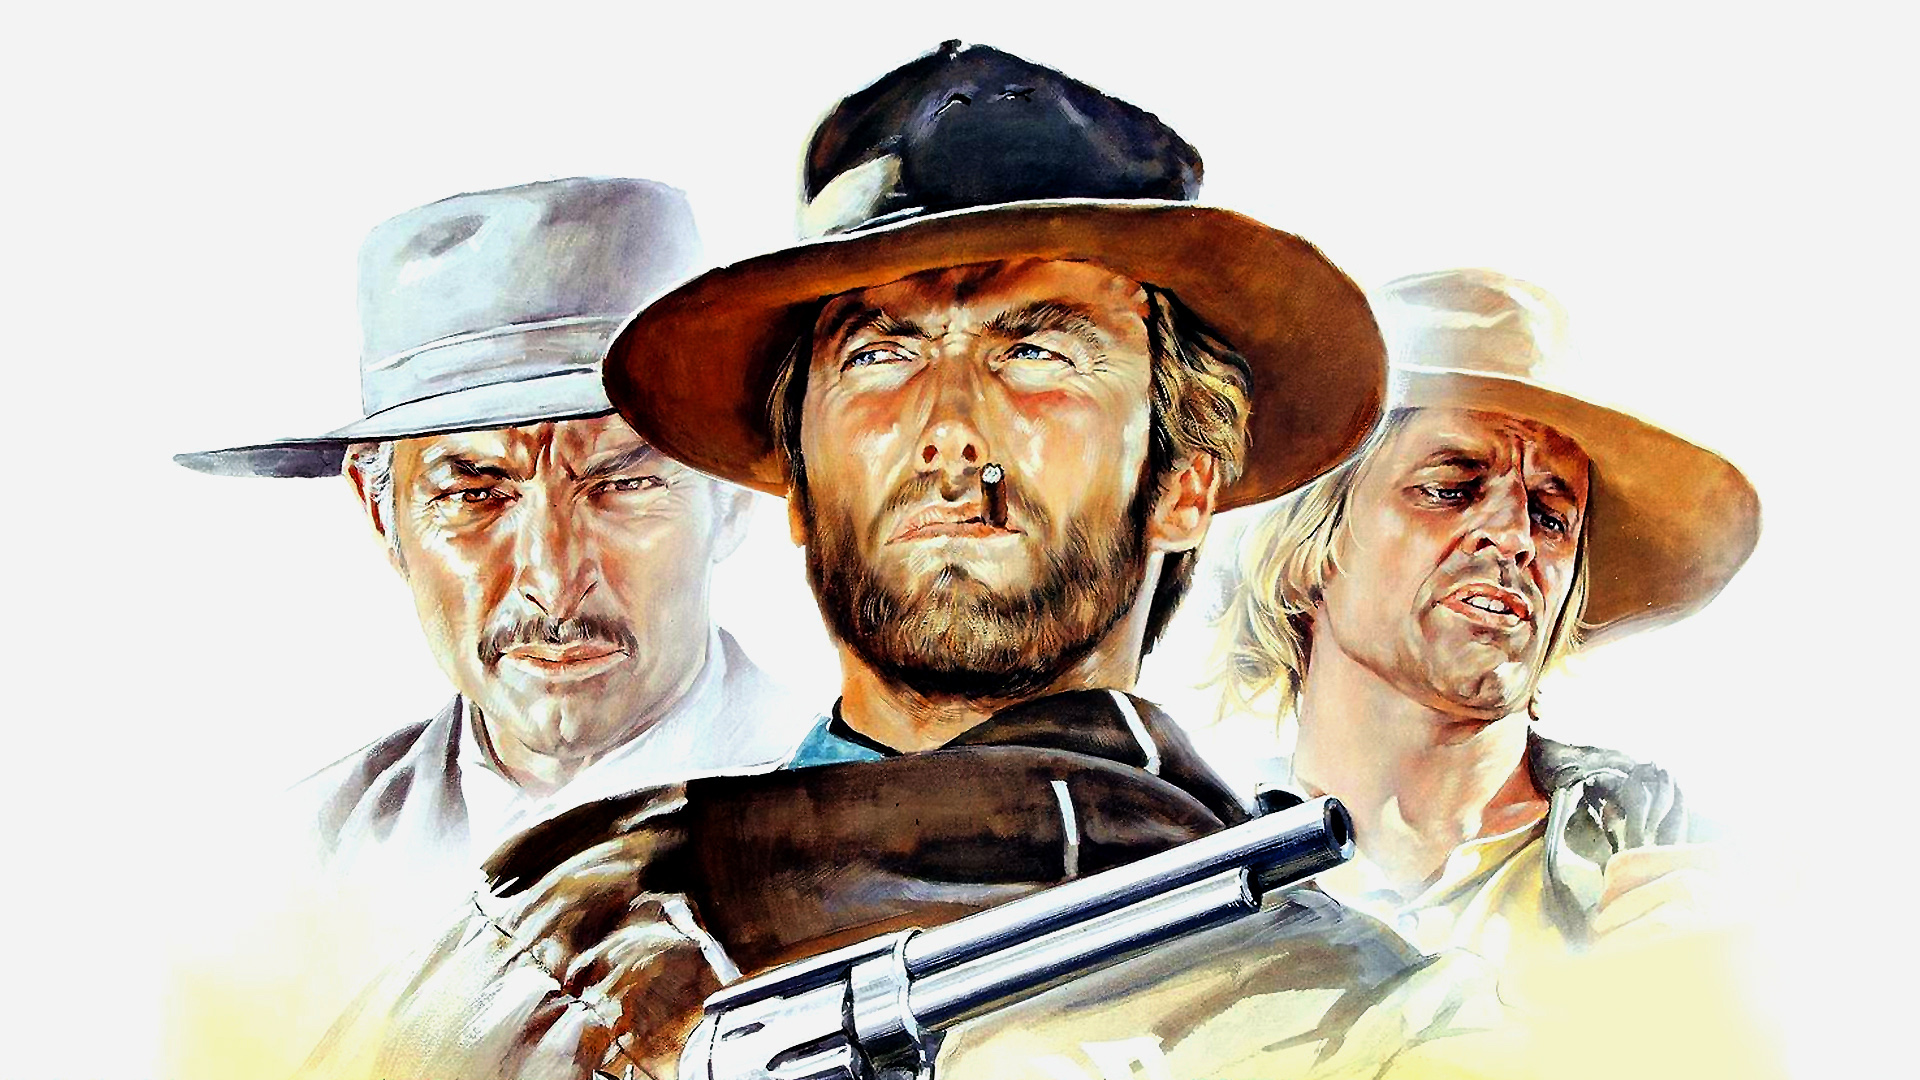 Wallpaper Clint Eastwood in For a Few Dollars More, 1965 movie